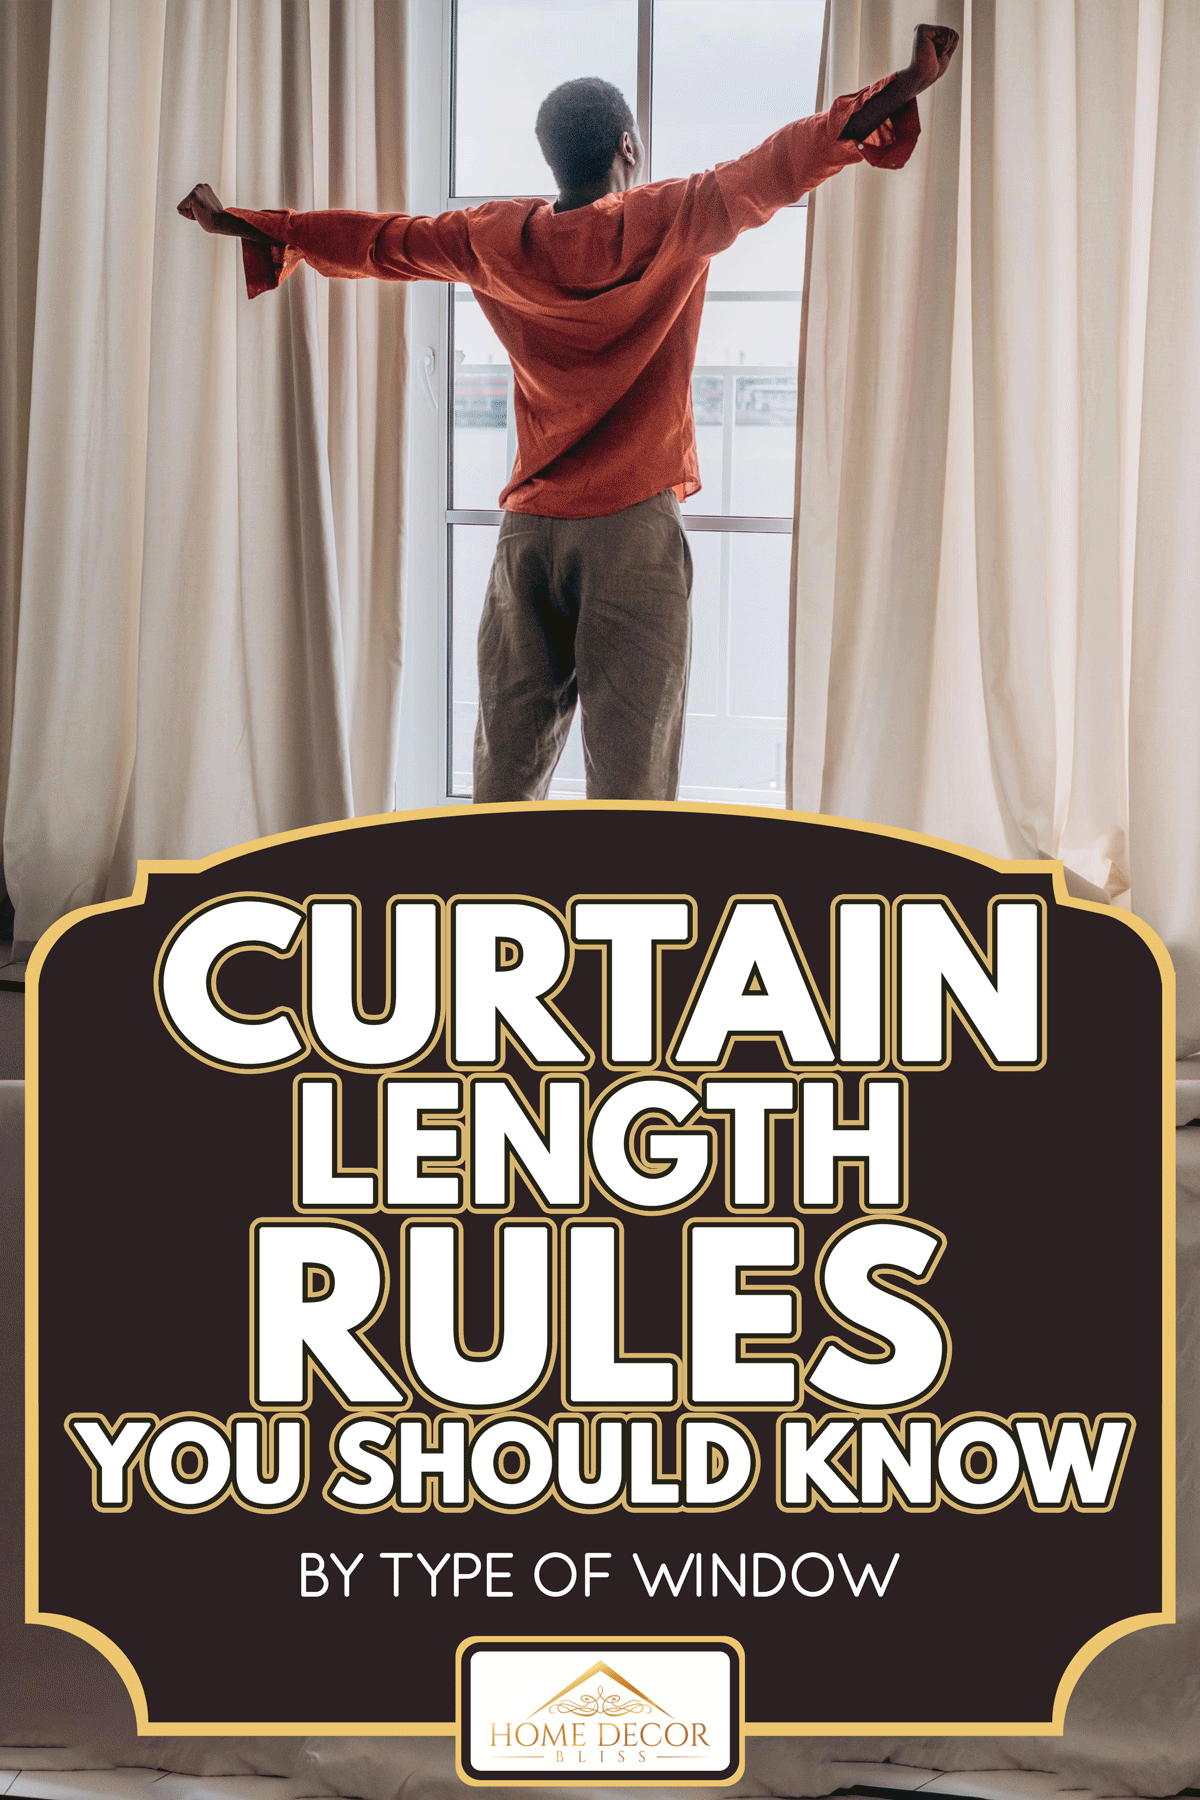 Man stretches after waking up standing at the window, Curtain Length Rules You Should Know [By Type Of Window]